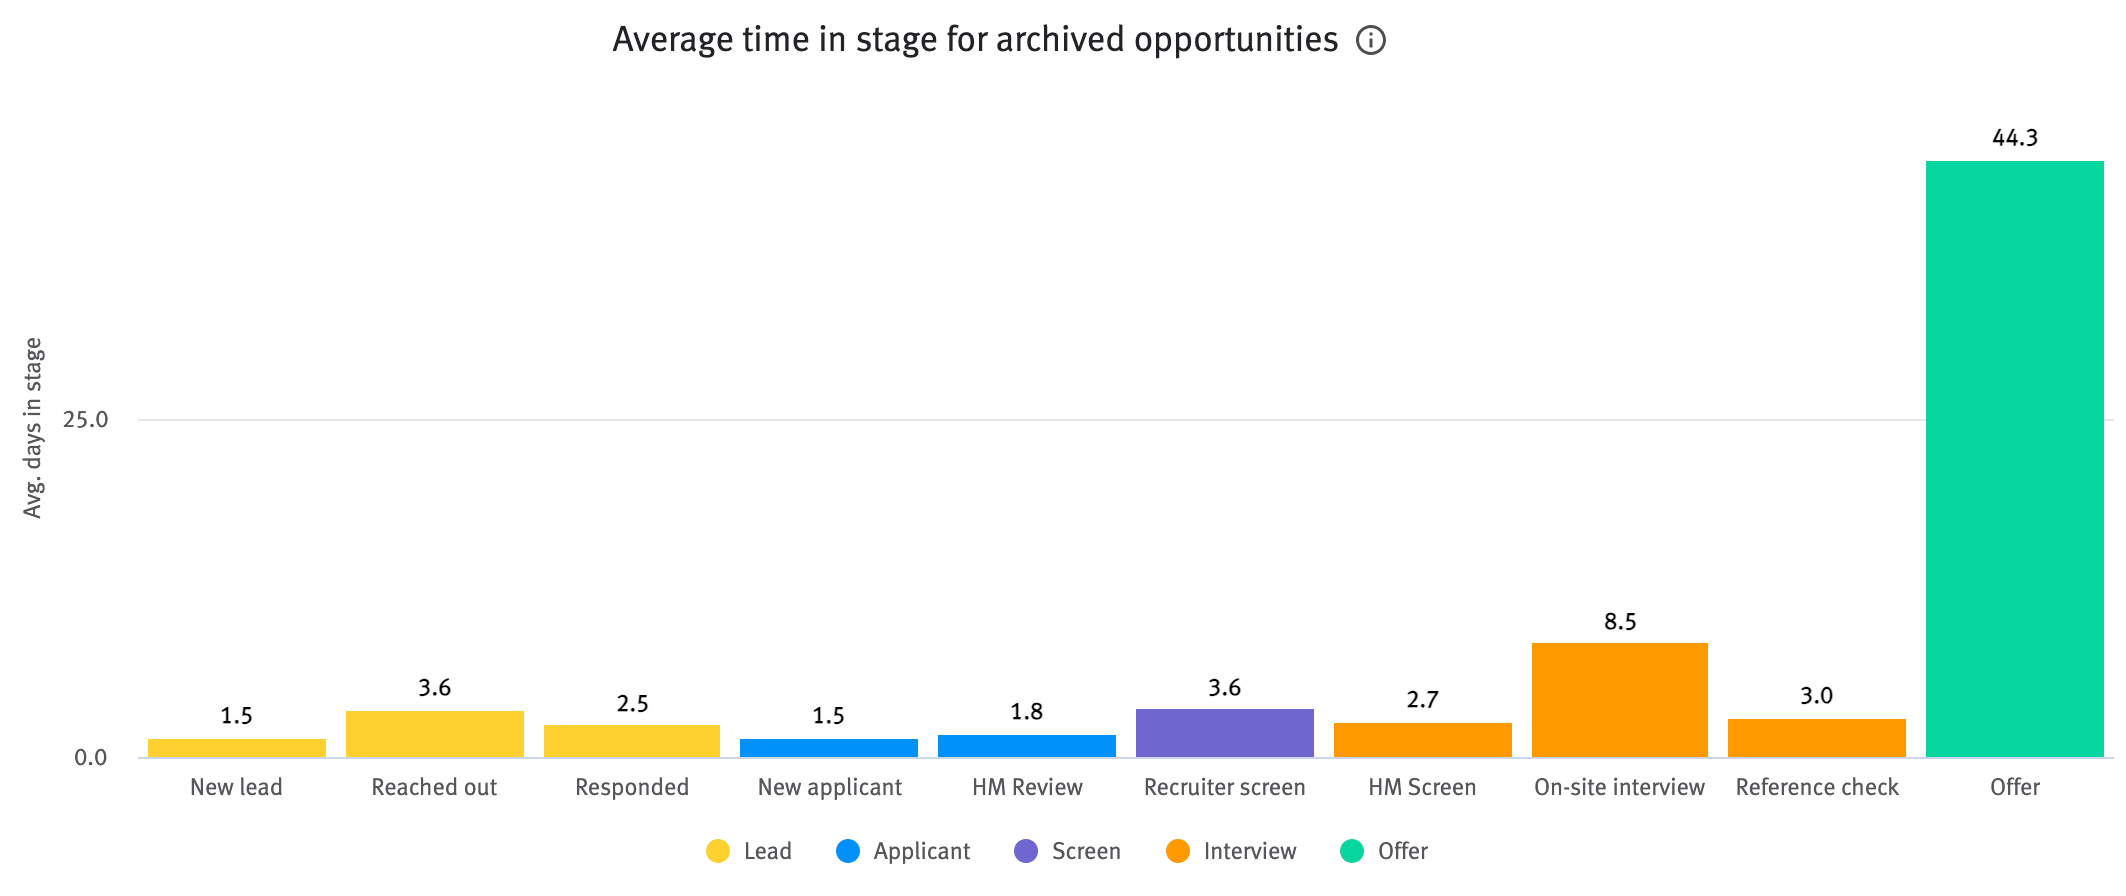 Average time in stage for archived opportunities chart